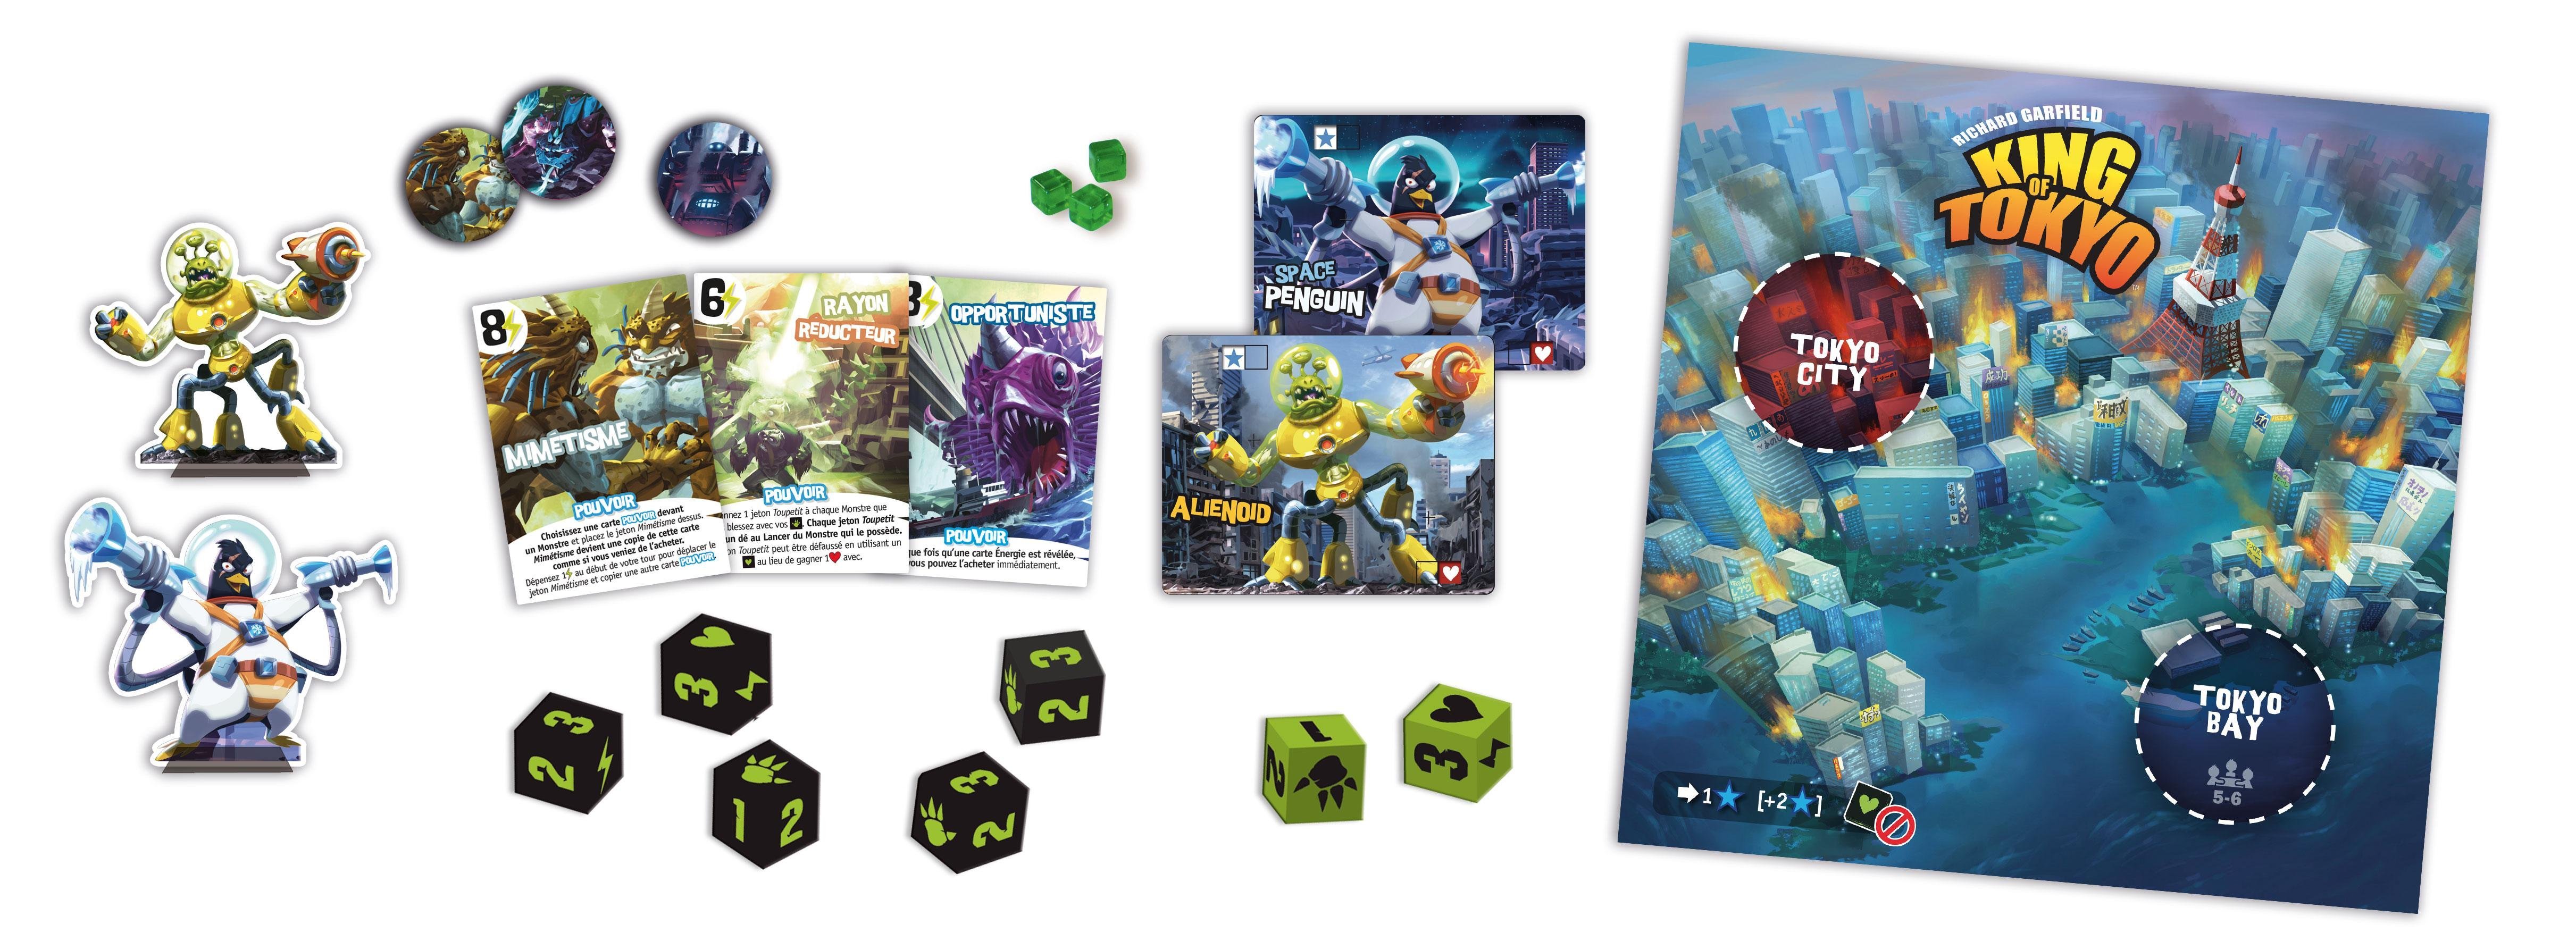 king of tokyo game review